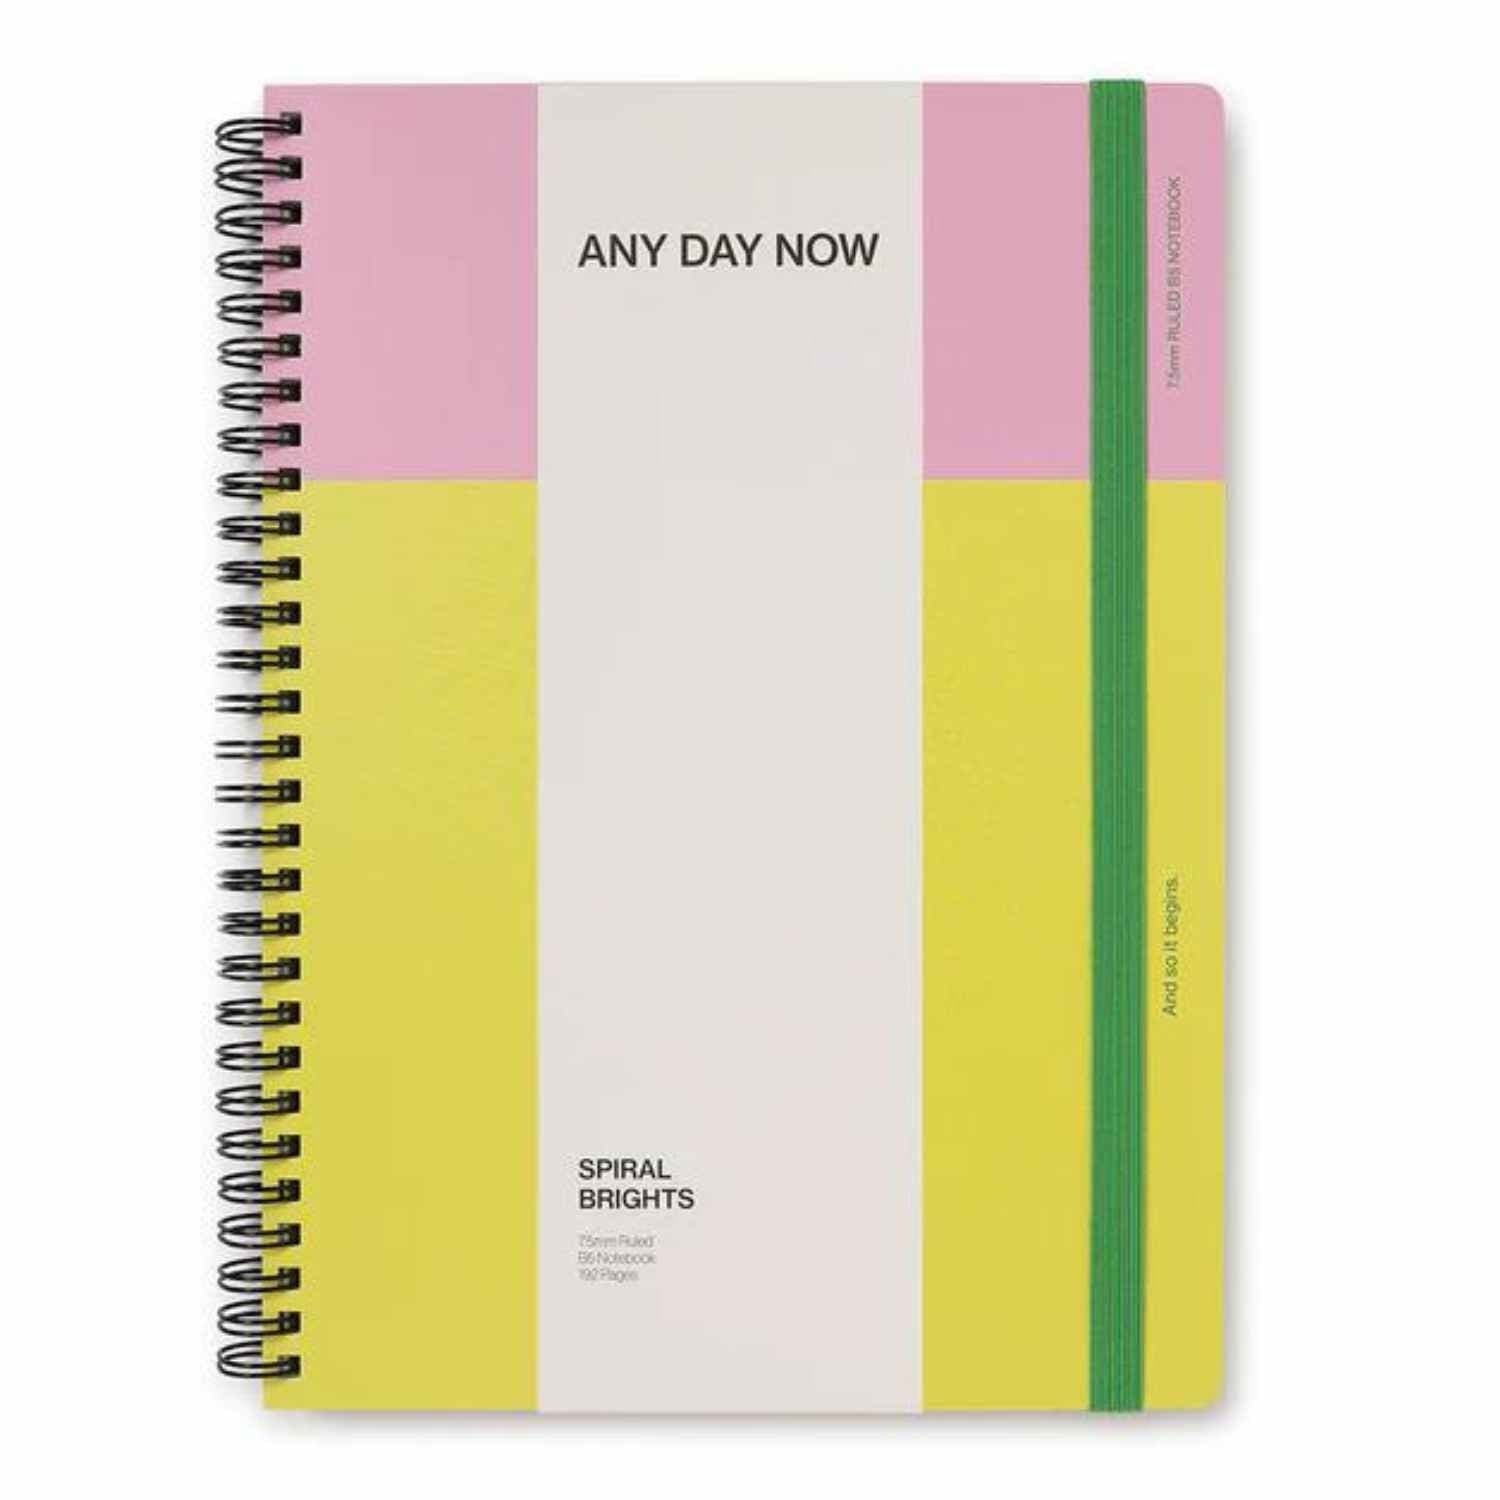 Any Day Now Spiral Notebook B5 - Ruled - Pink + Yellow